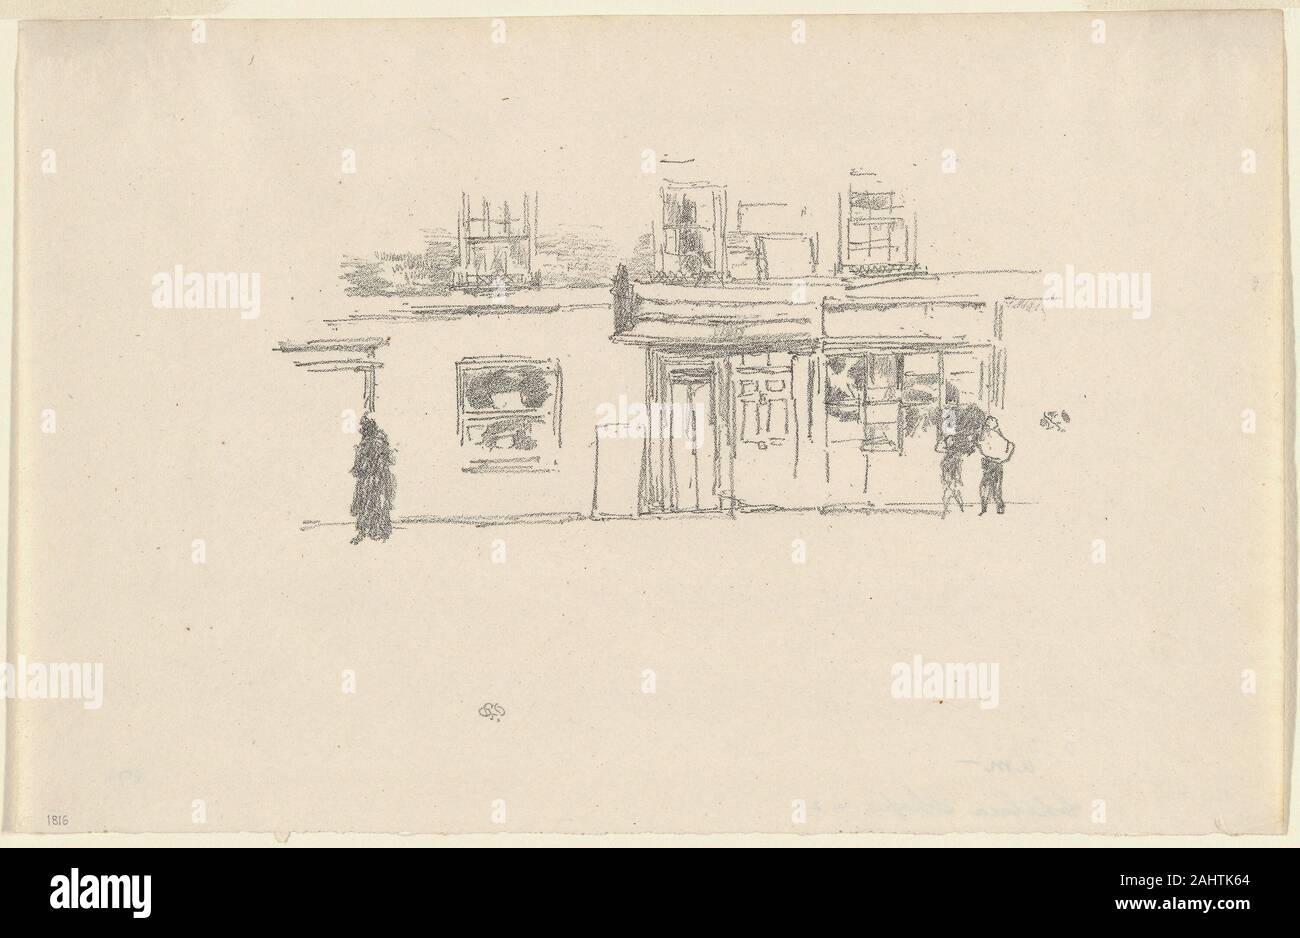 James McNeill Whistler. Chelsea Shops. 1888. United States. Transfer lithograph in black ink on ivory laid paper Stock Photo